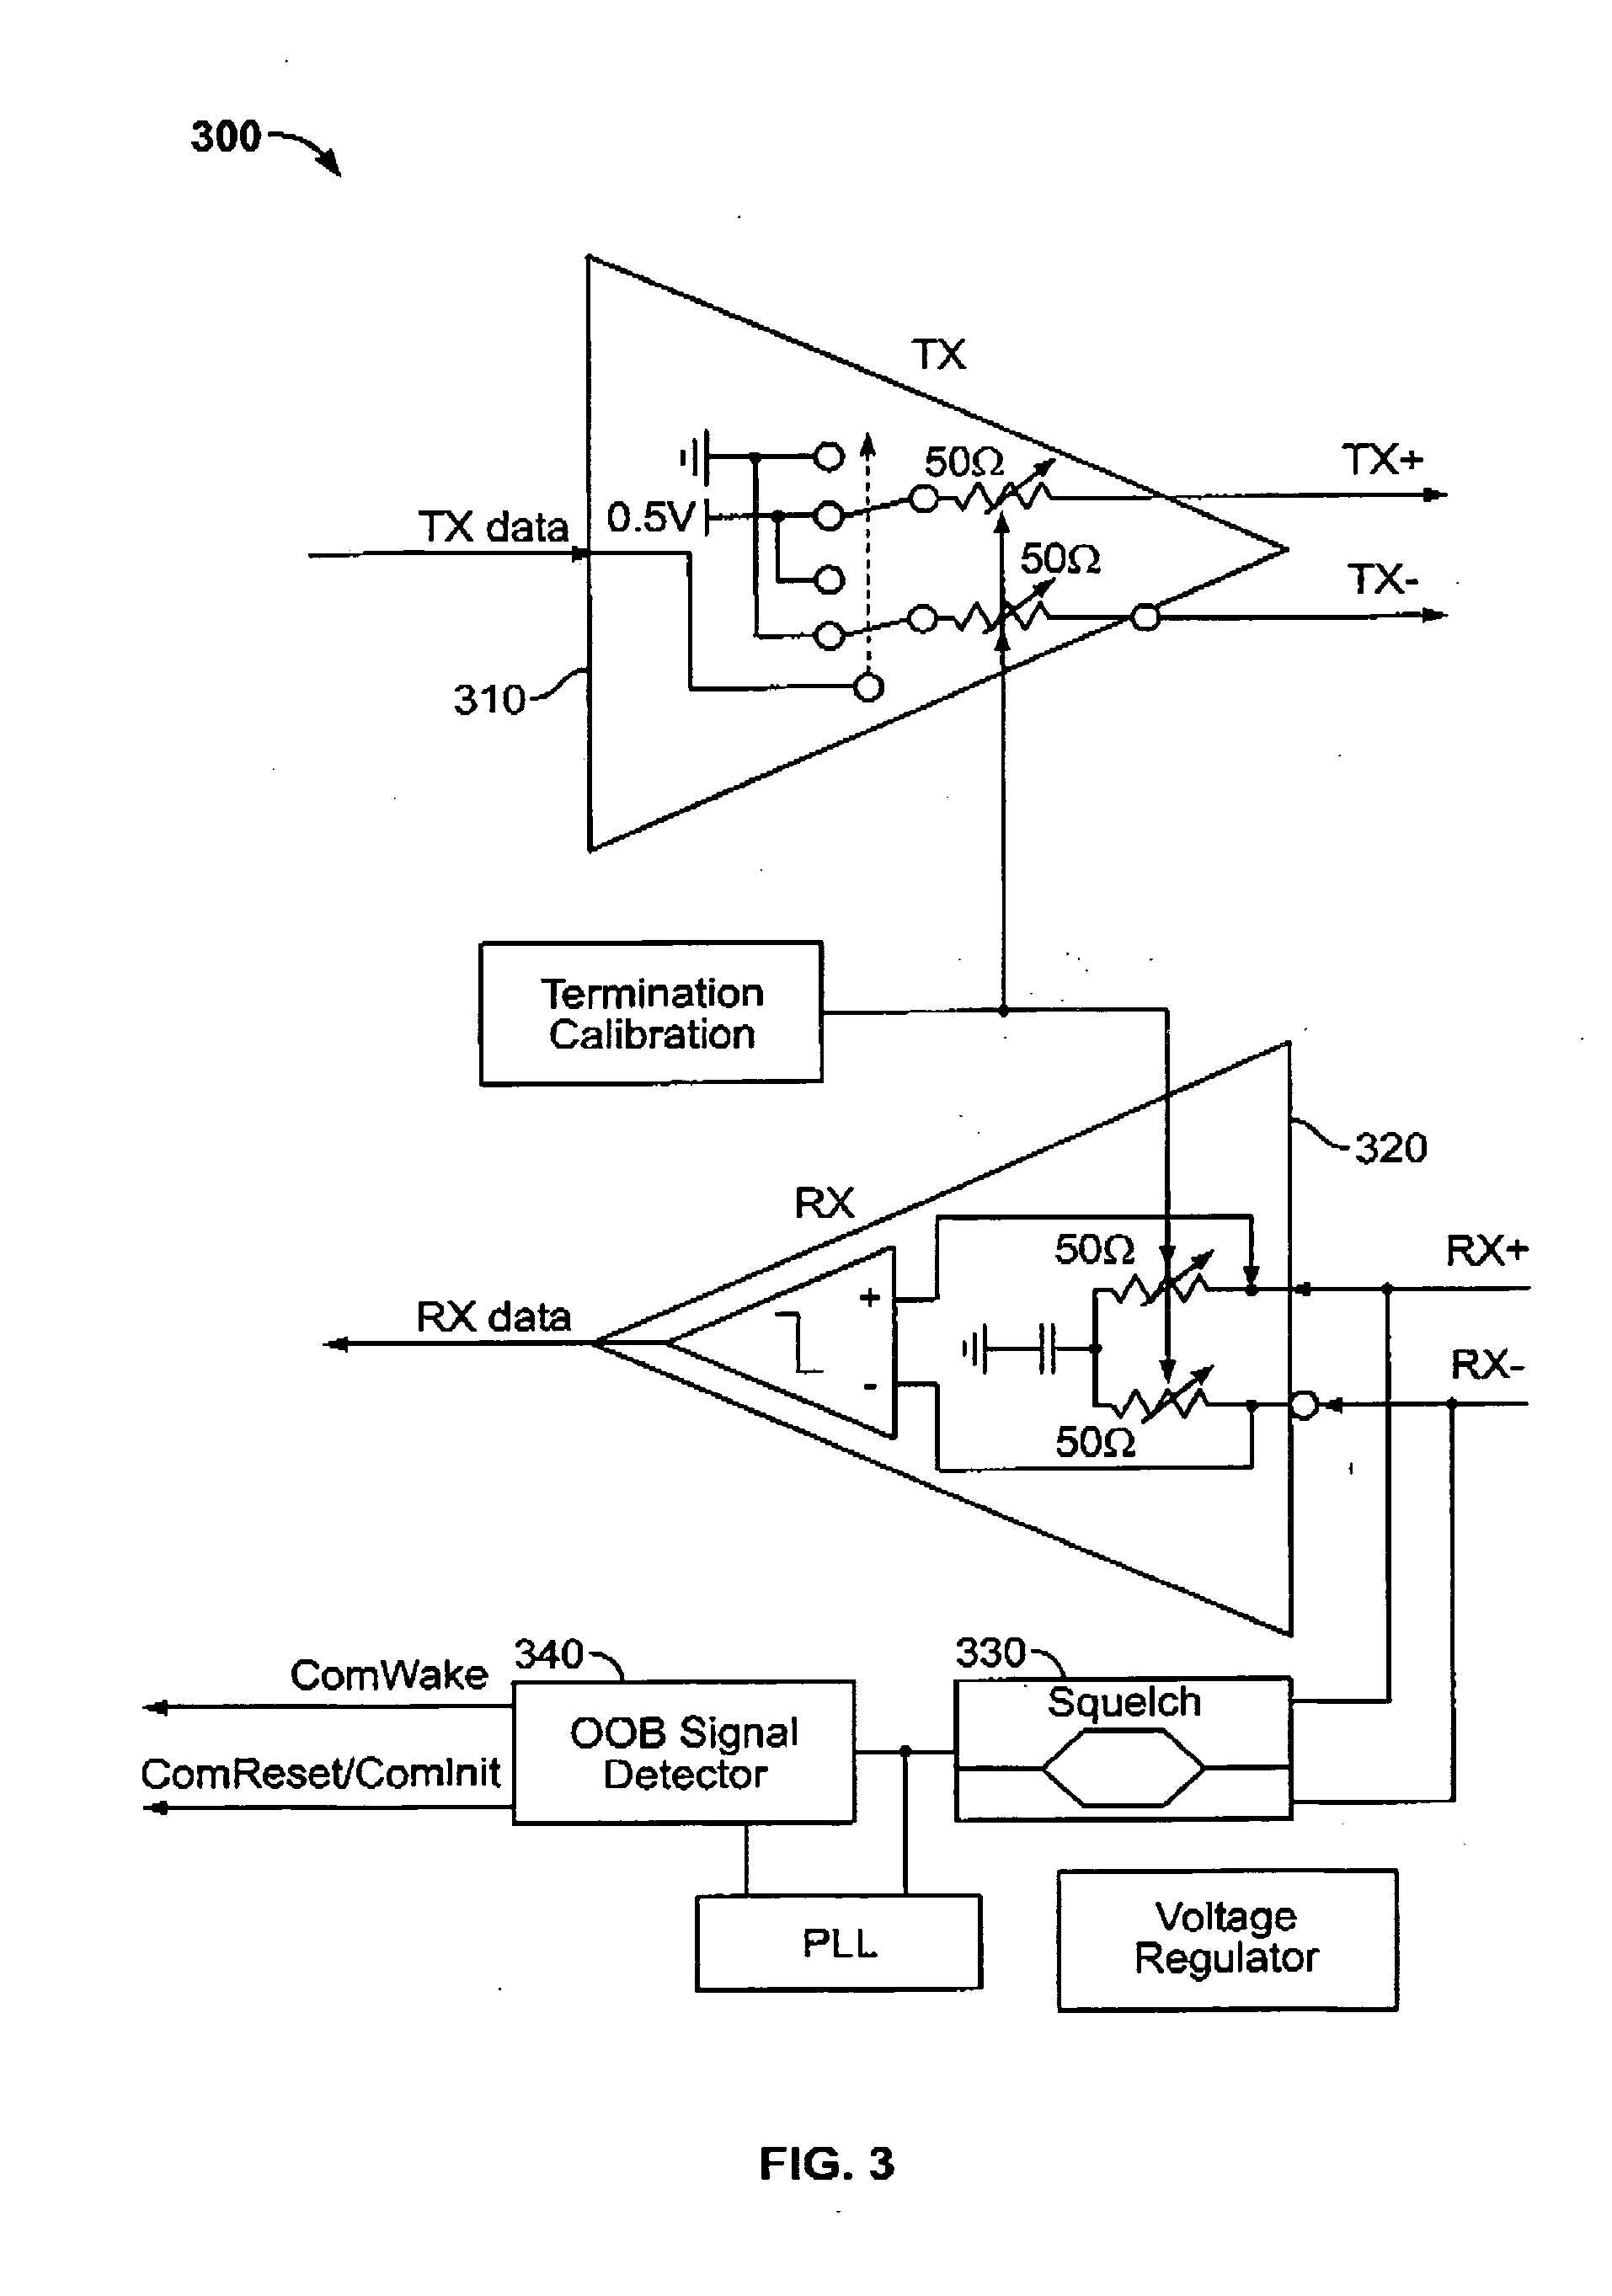 Apparatus and method for selectively enabling and disabling a squelch circuit across AHCI and SATA power states